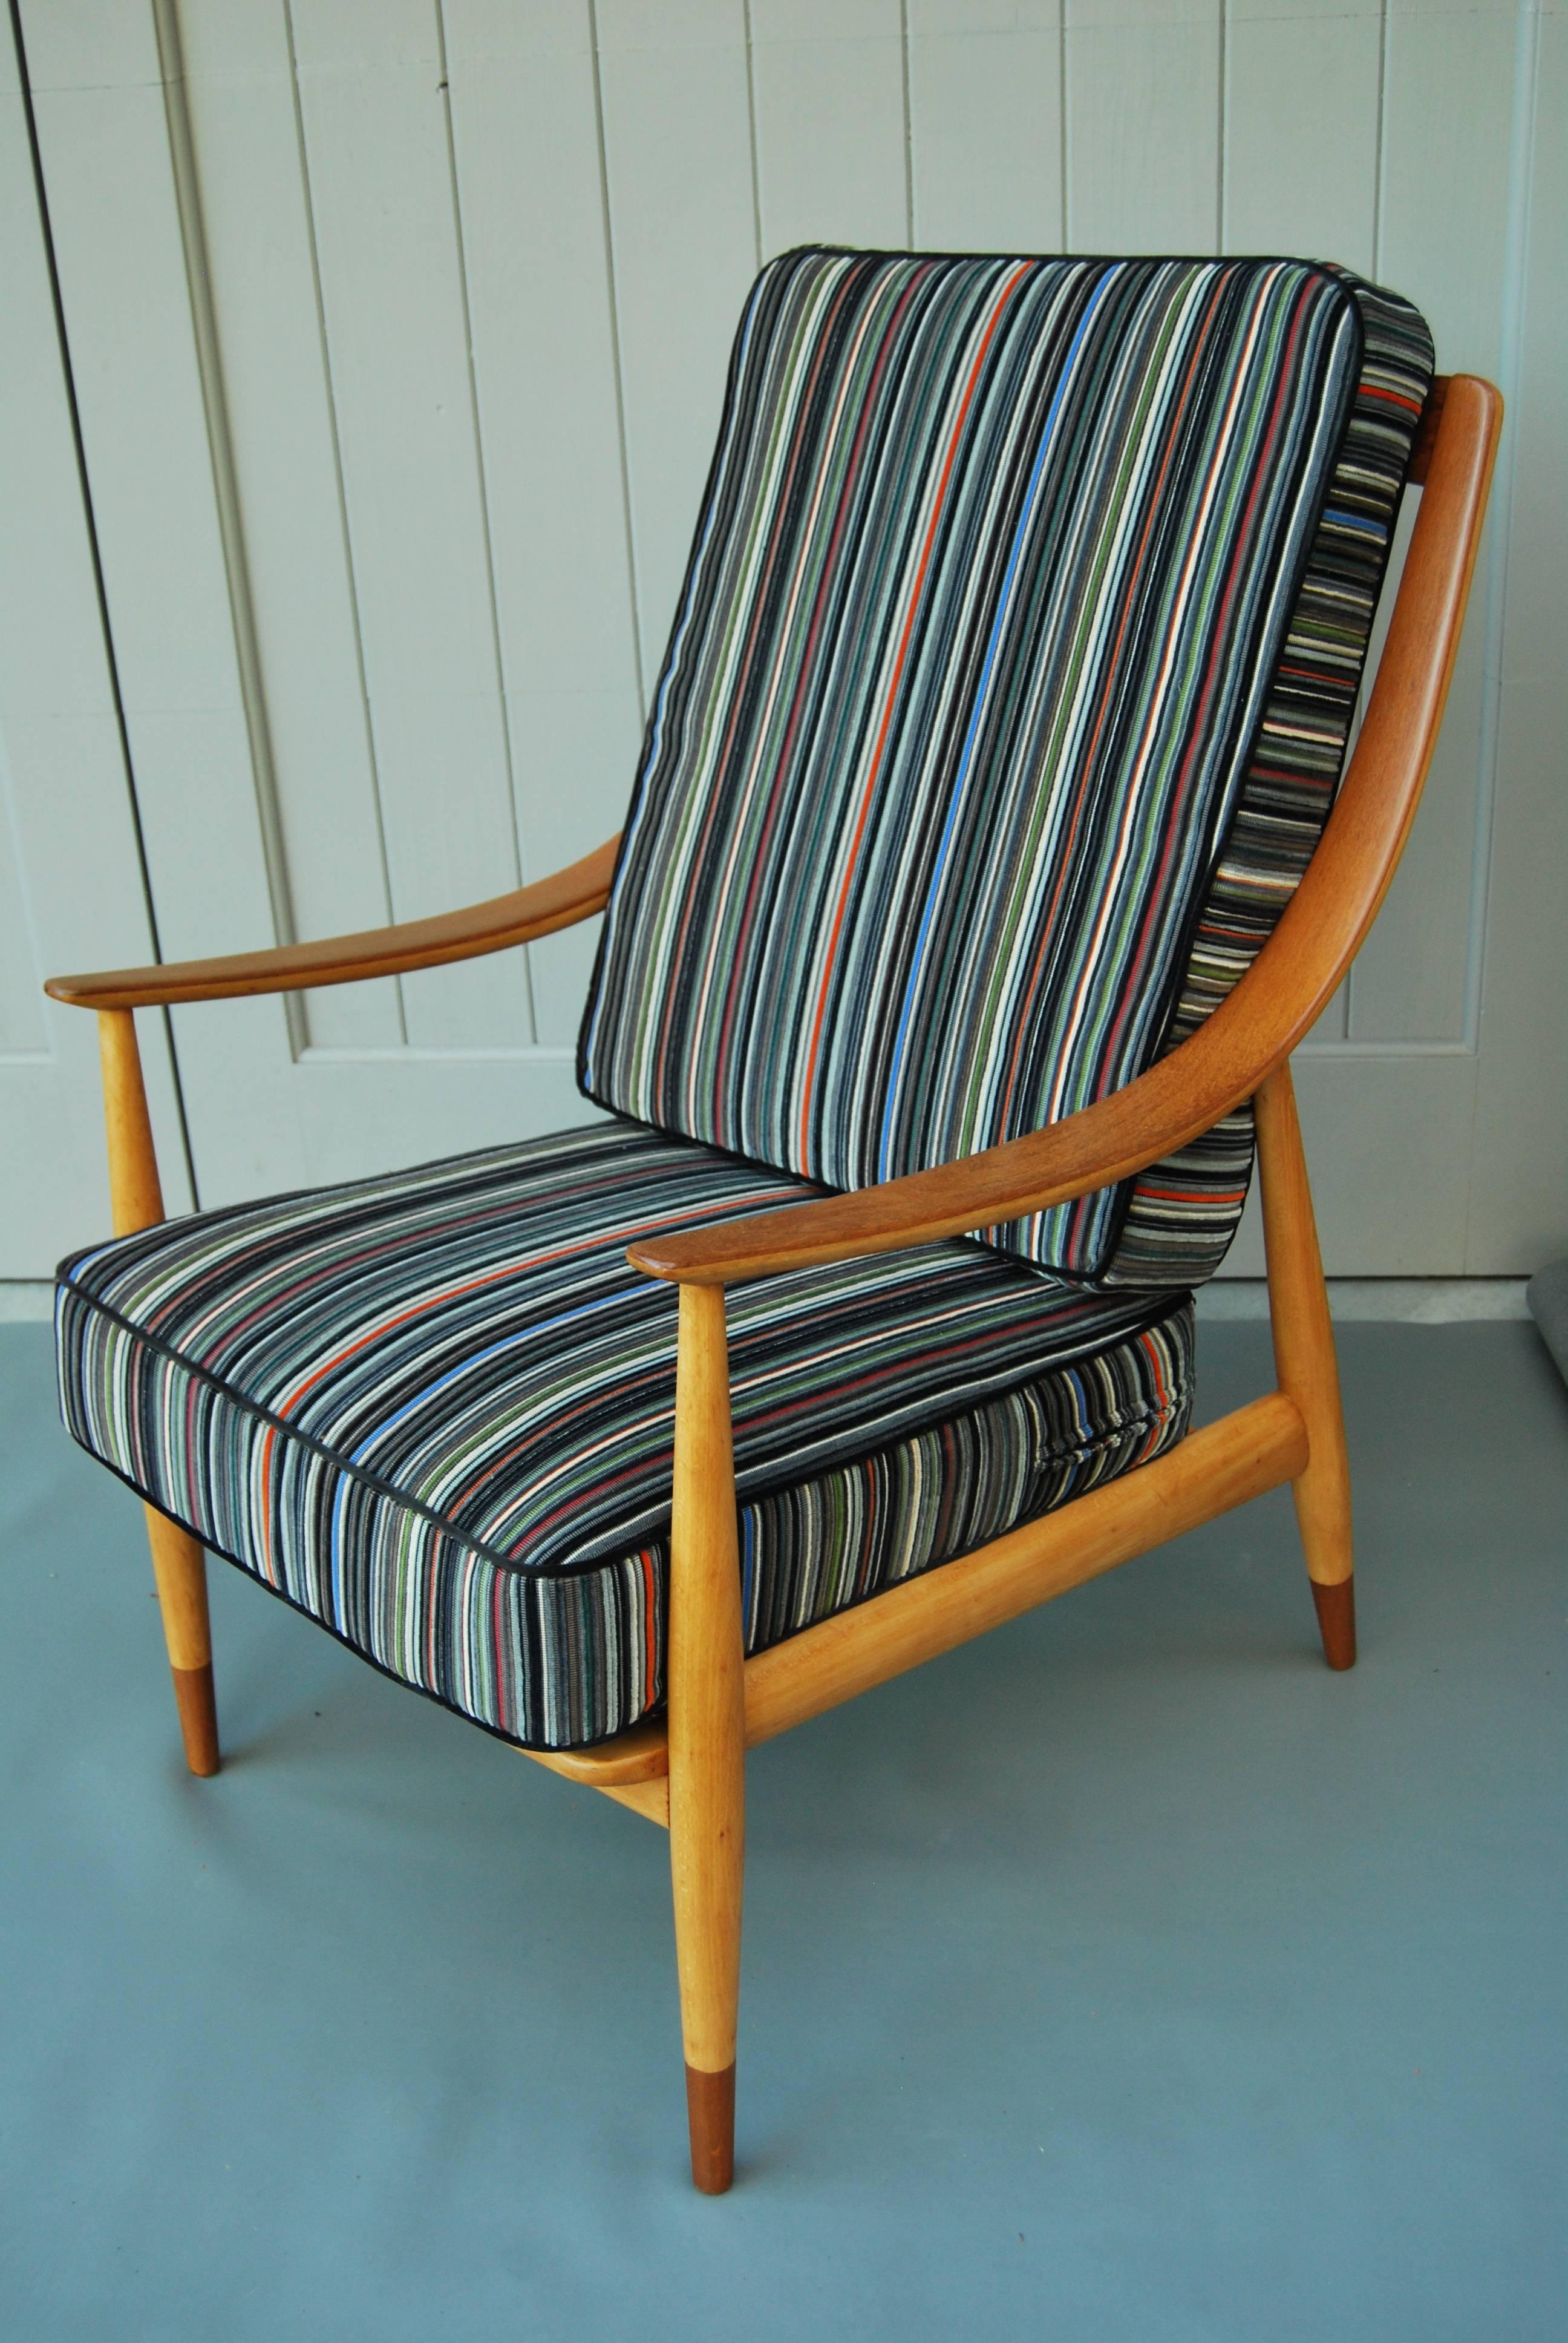 Newly refinished and reupholstered, great scale Peter Hvidt easy teak chair, produced by France & Son, 1960s.
Frame has been refinished in its original, natural color and spring cushions have been reupholstered in Maharam striped velvet.
Great